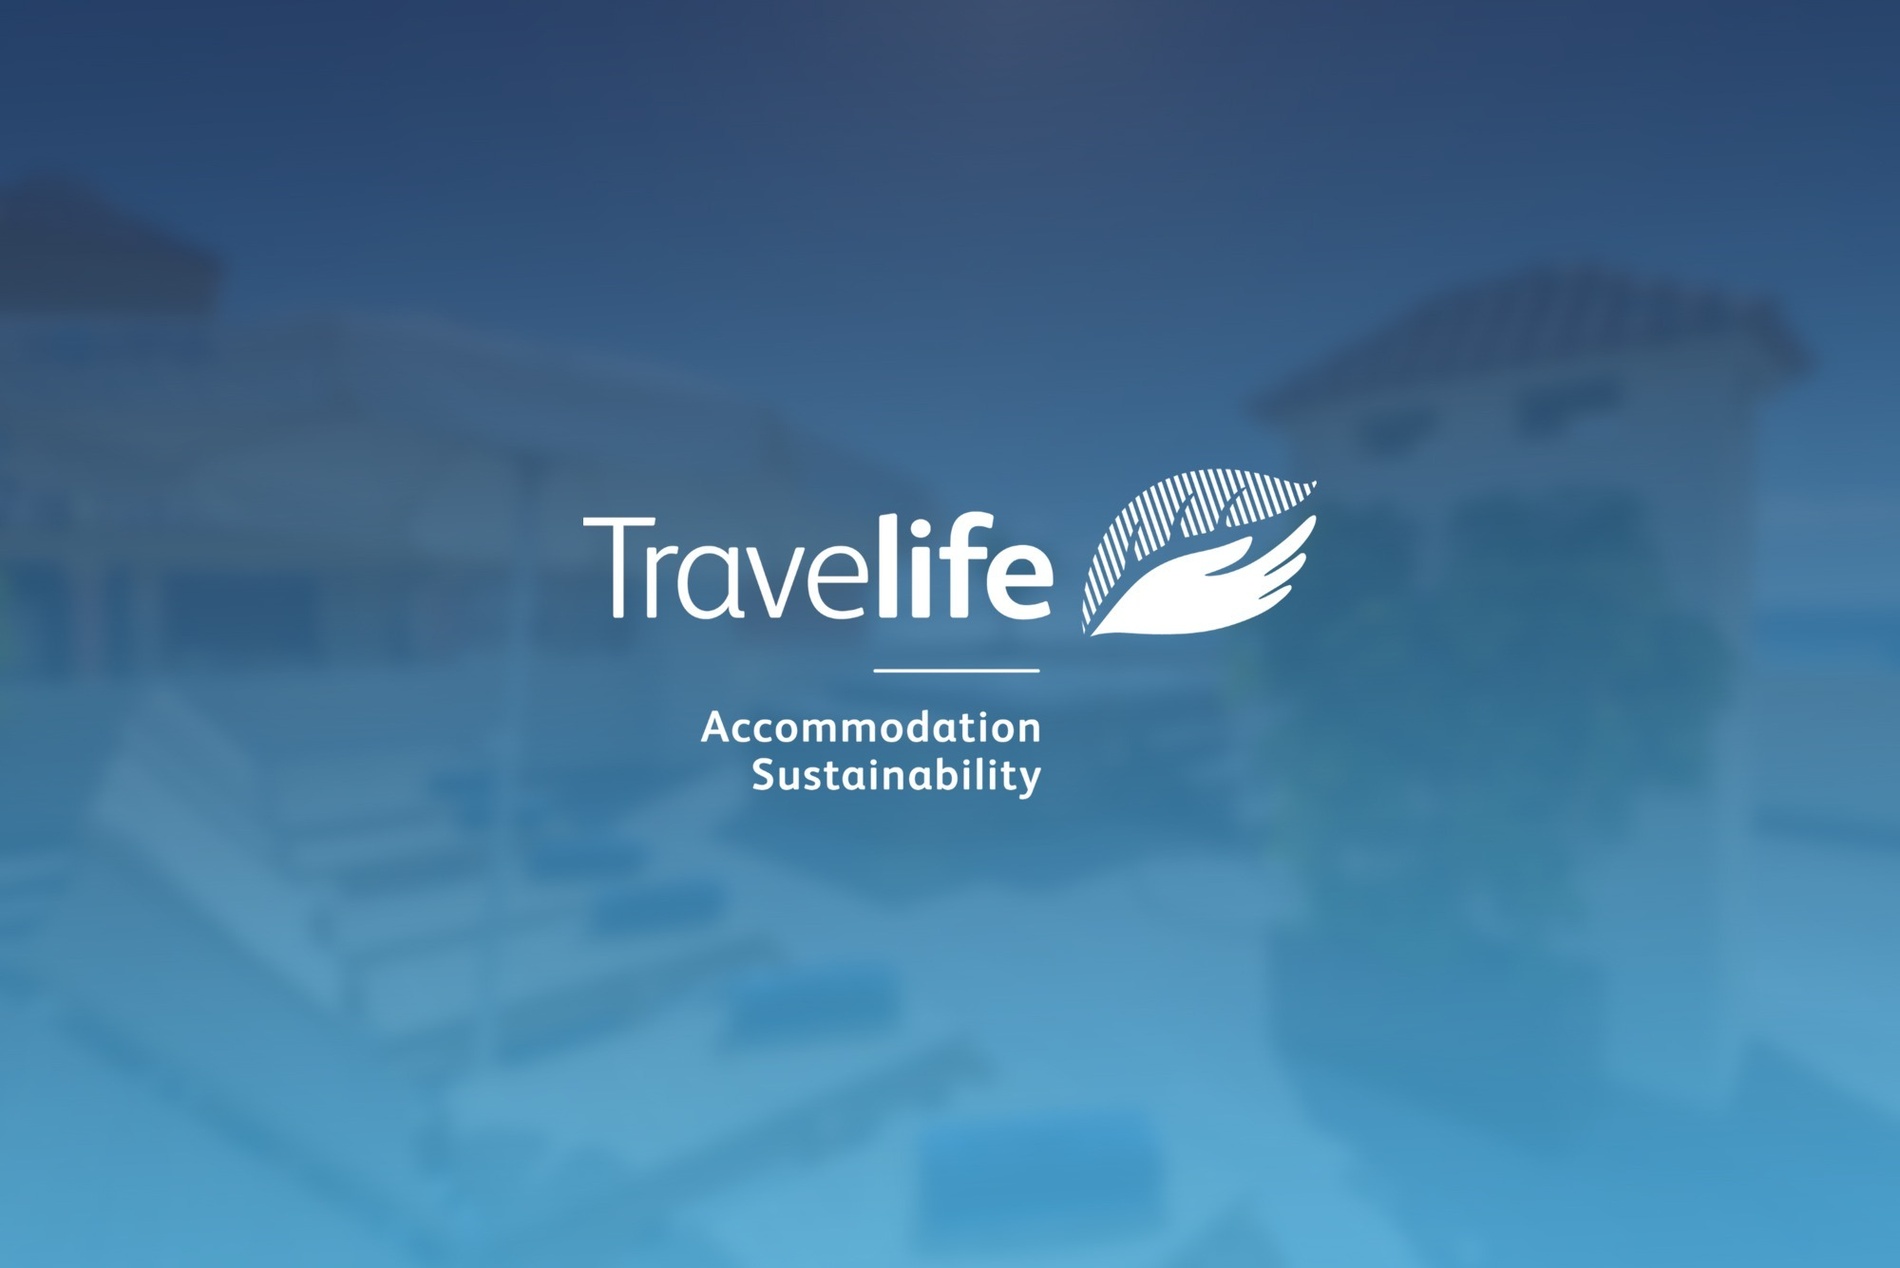 a travellife logo on a blue background